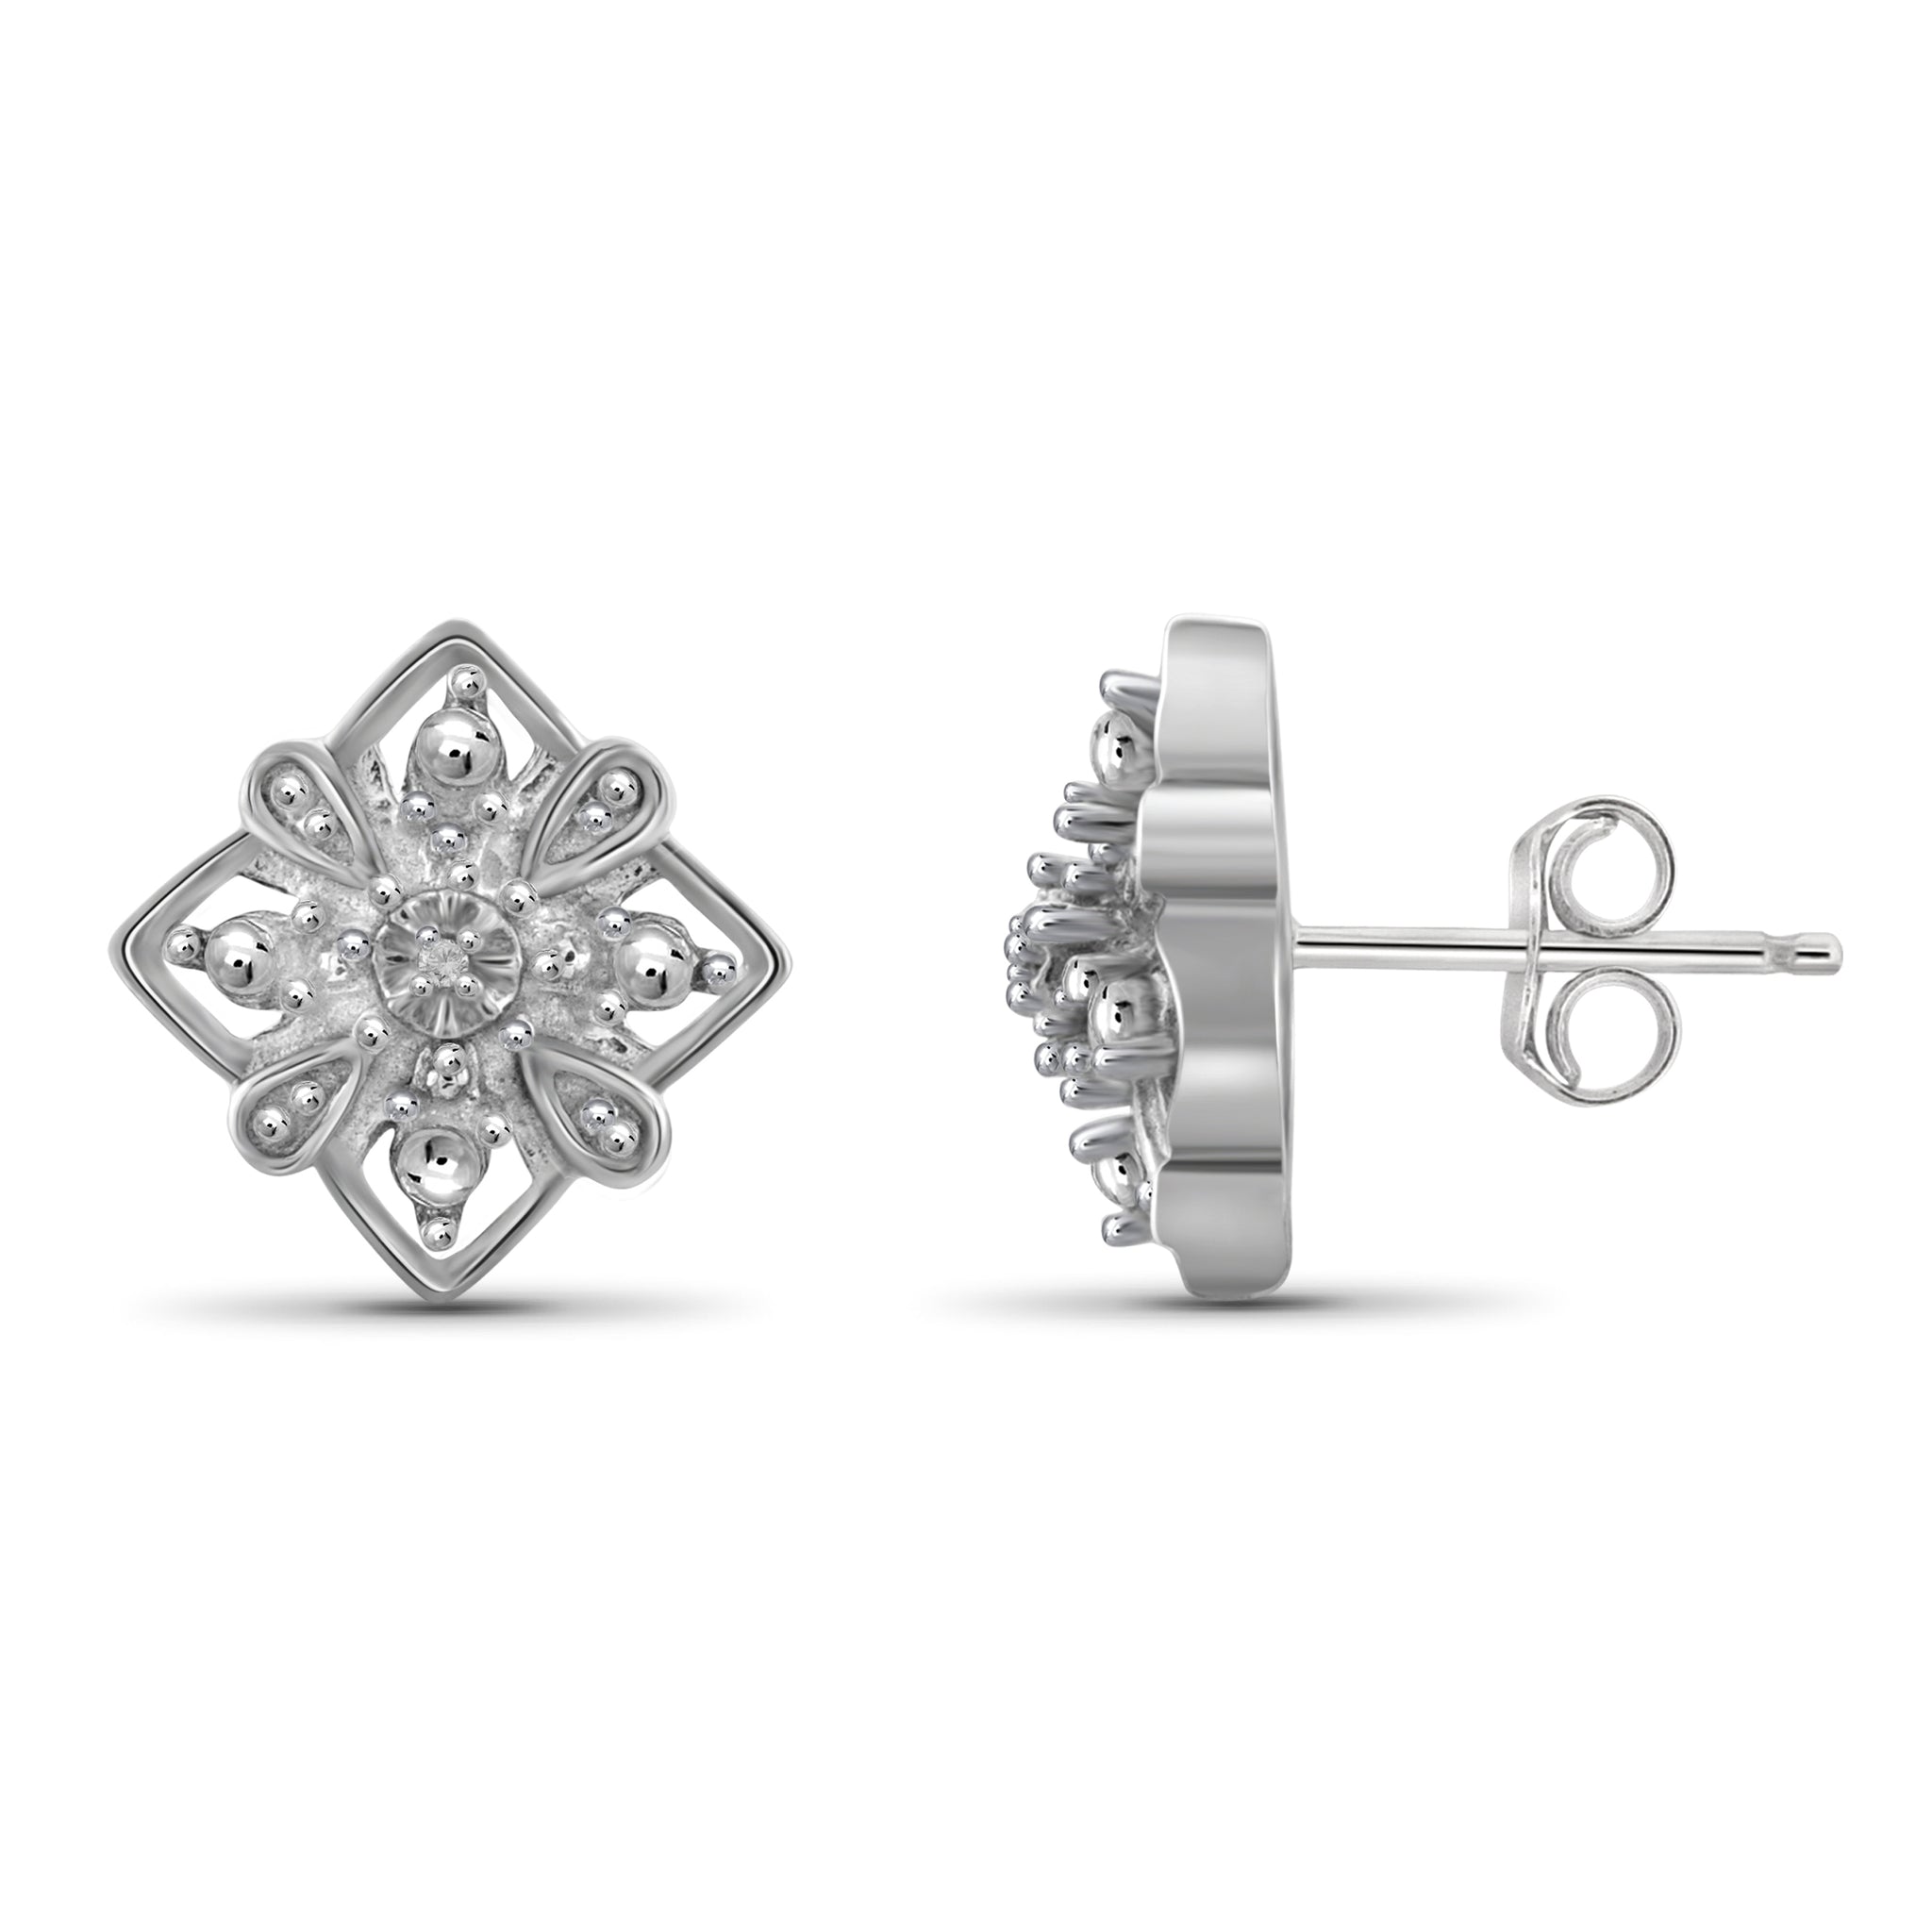 JewelonFire Accent White Diamond Sterling Silver Earrings